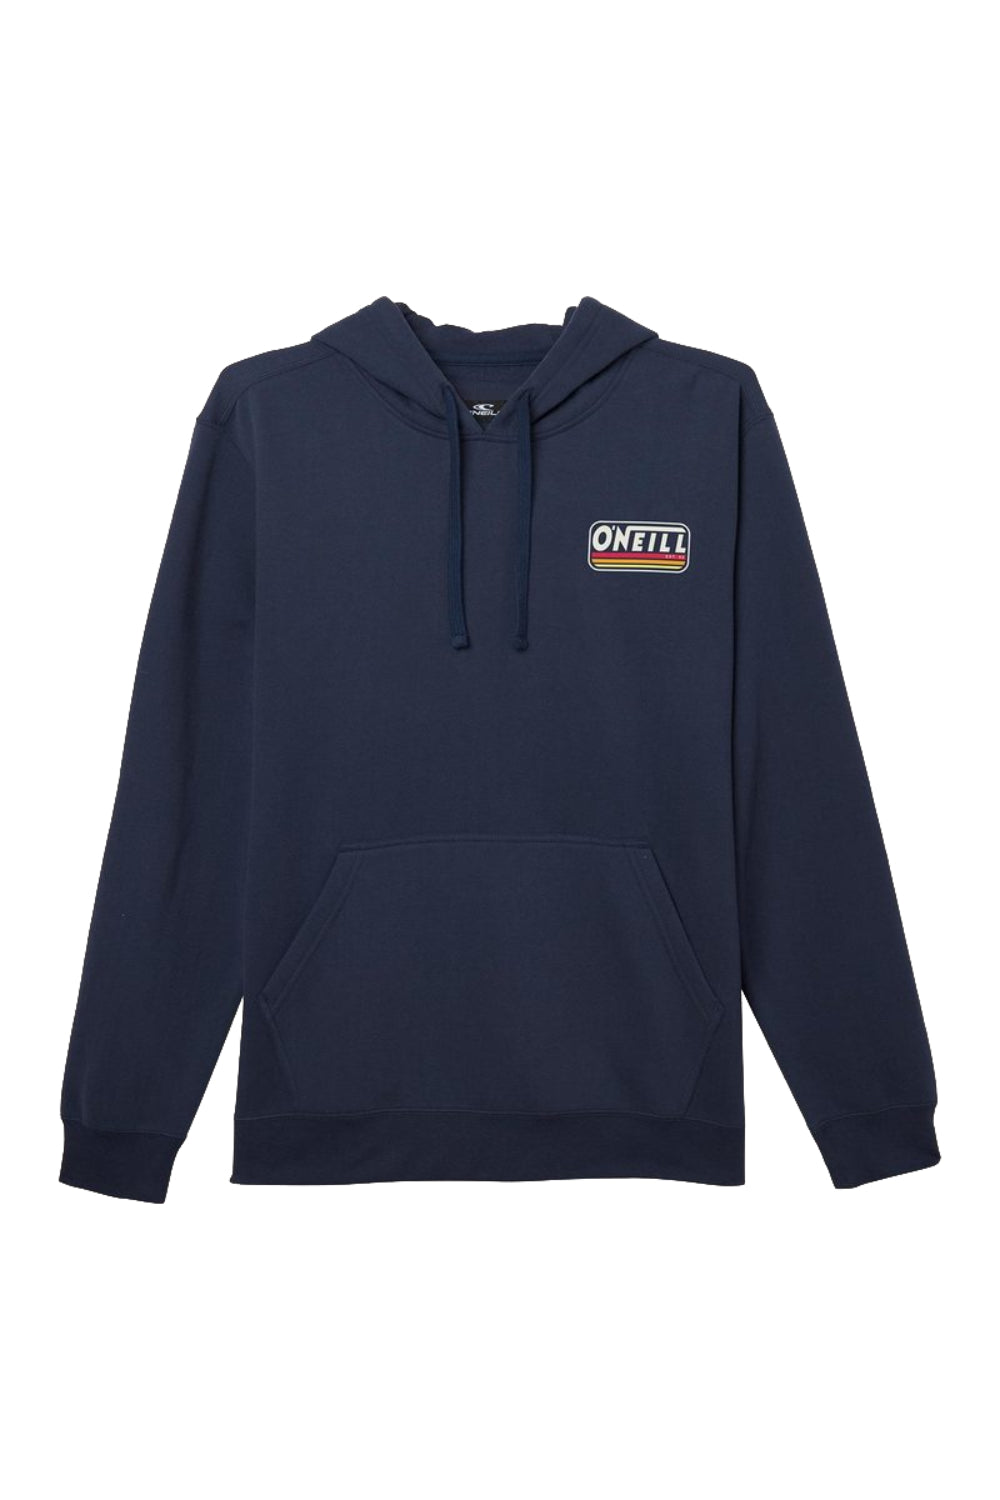 Oneill Fifty Two Pullover Fleece NVY2 S